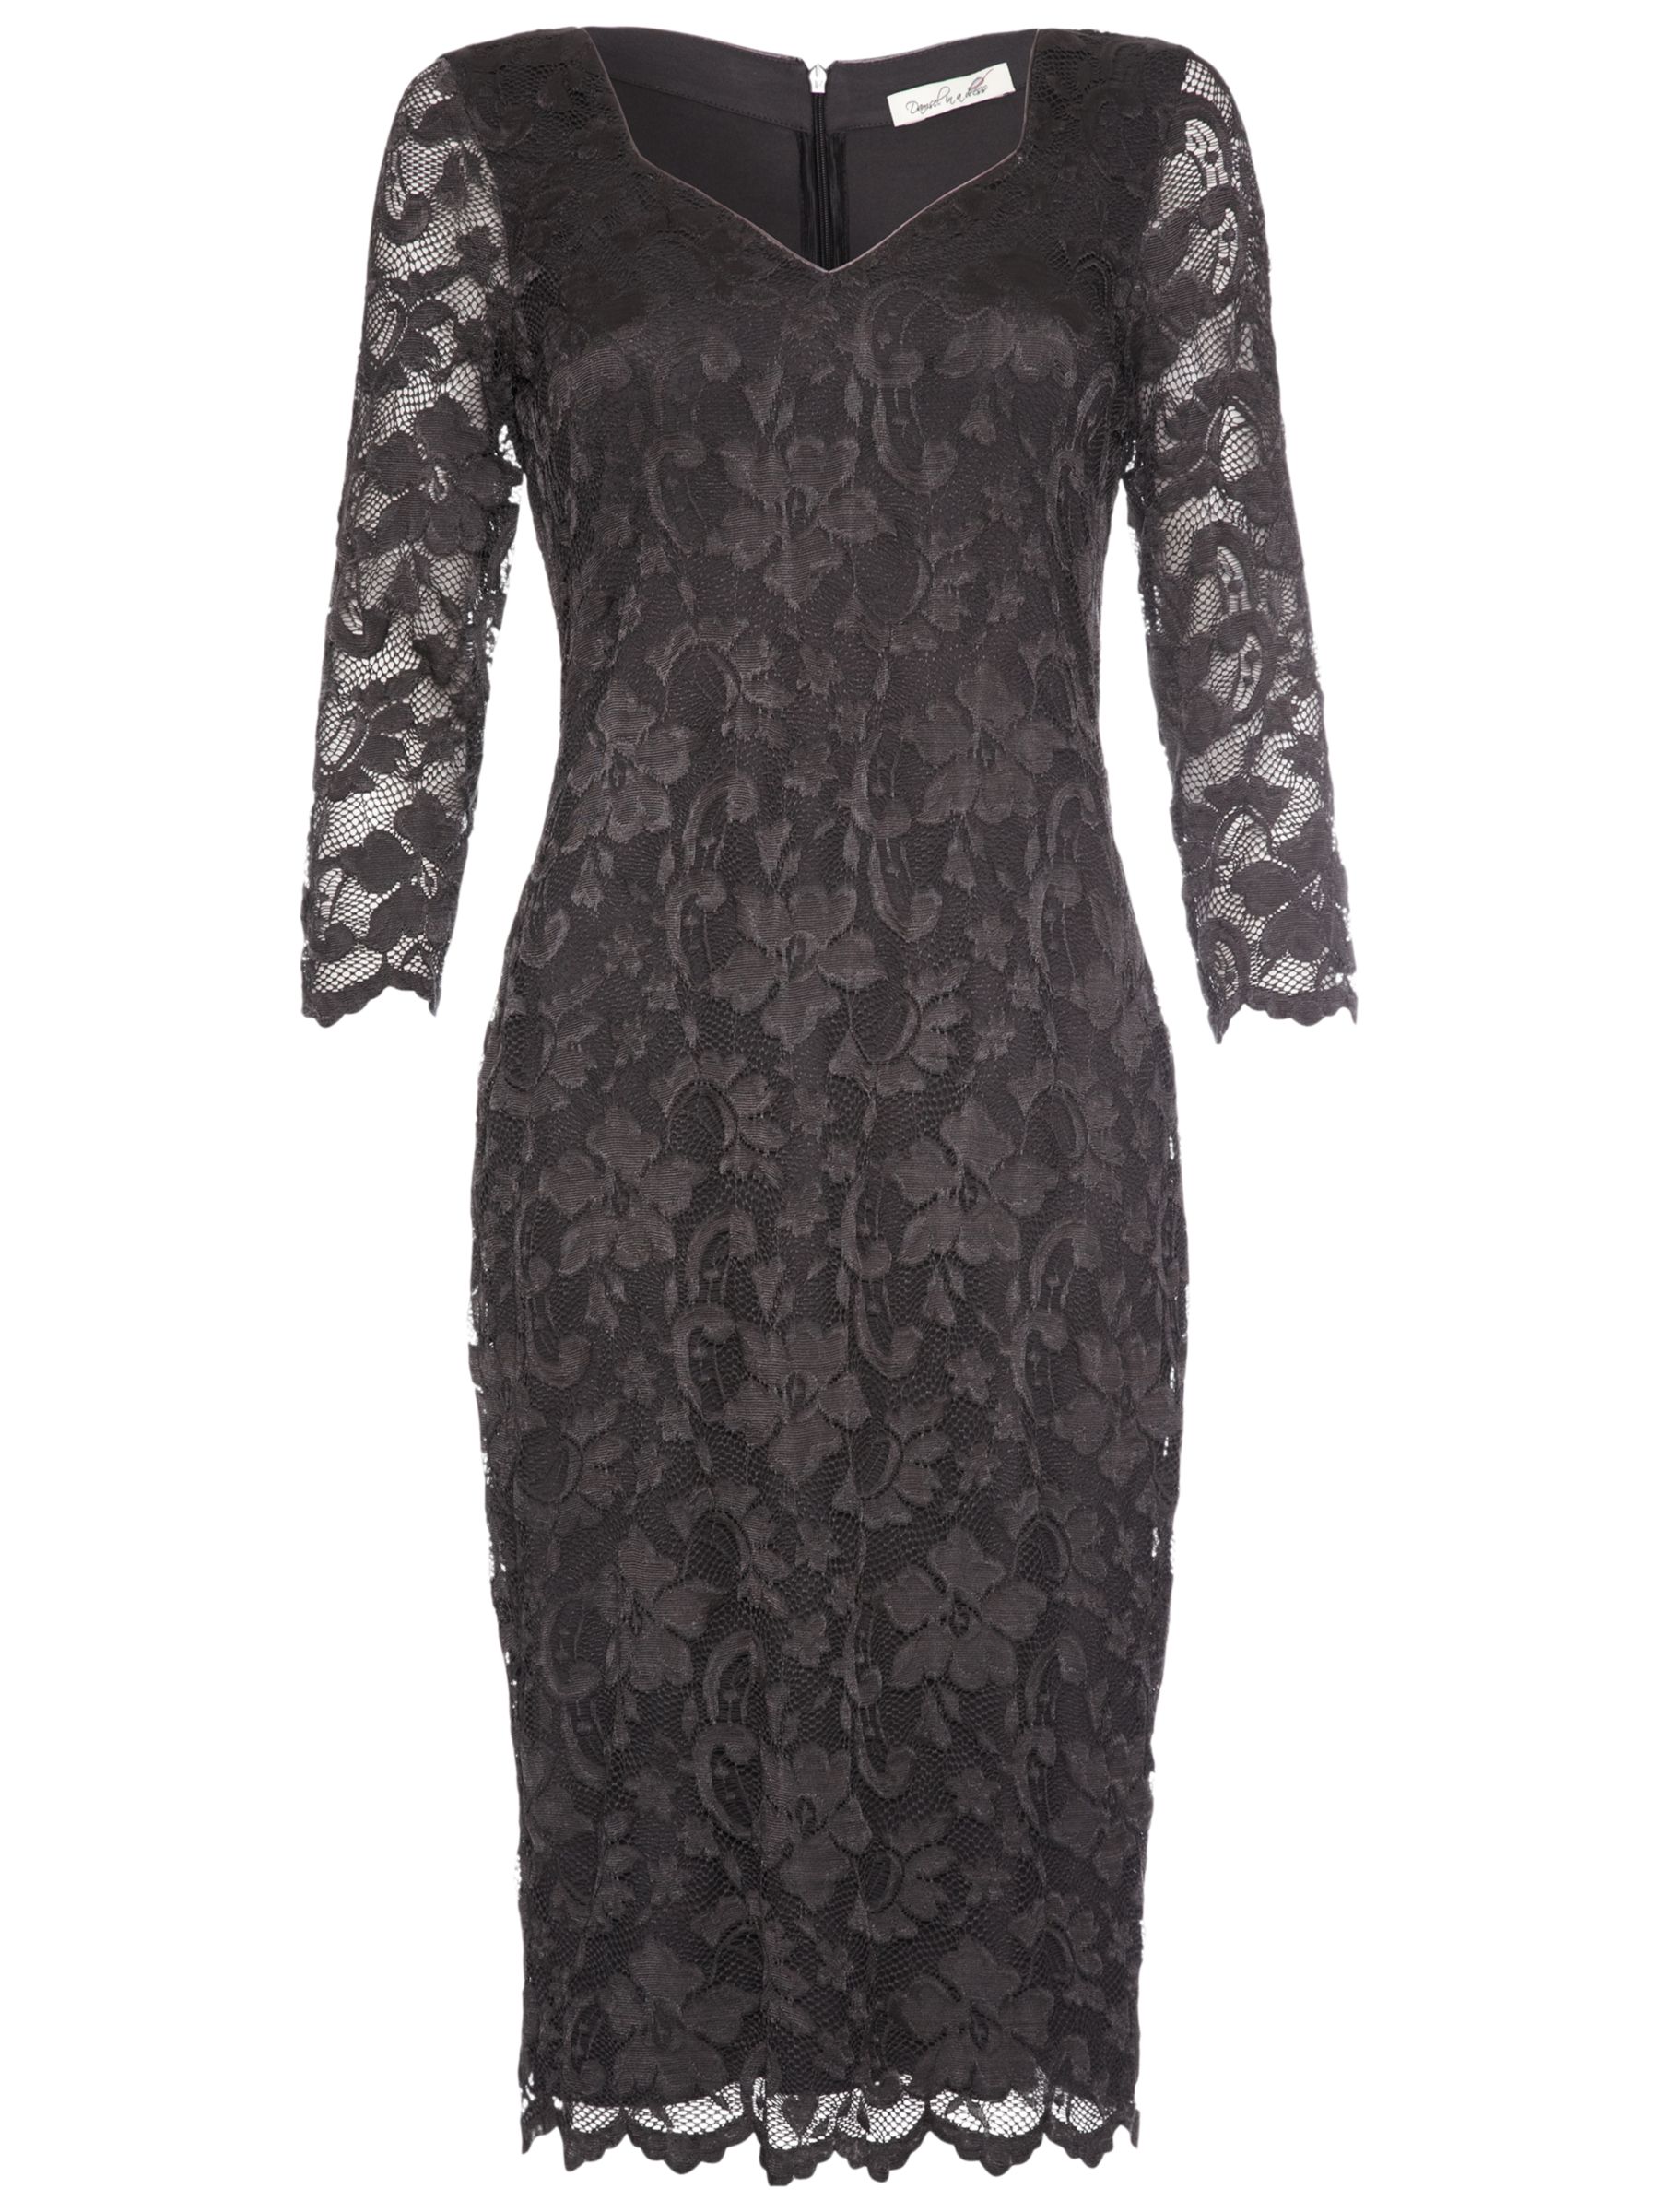 Damsel in a dress Cassis Lace Dress, Charcoal